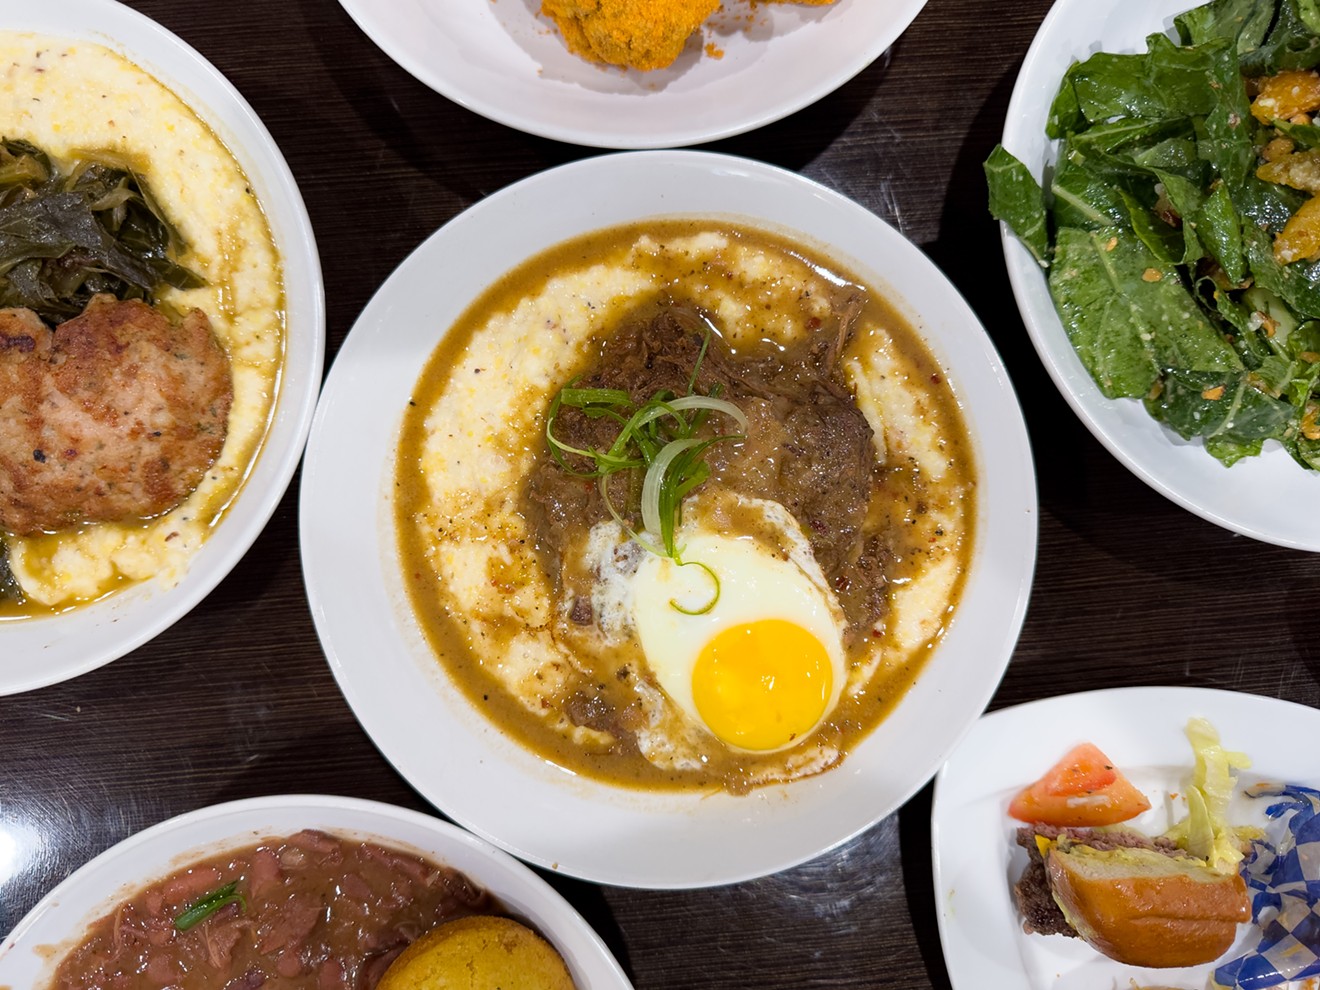 At CC's on Central, the debris and grits is a star — tender, saucy stewed beef on top of creamy, rough-hewn corn grits.